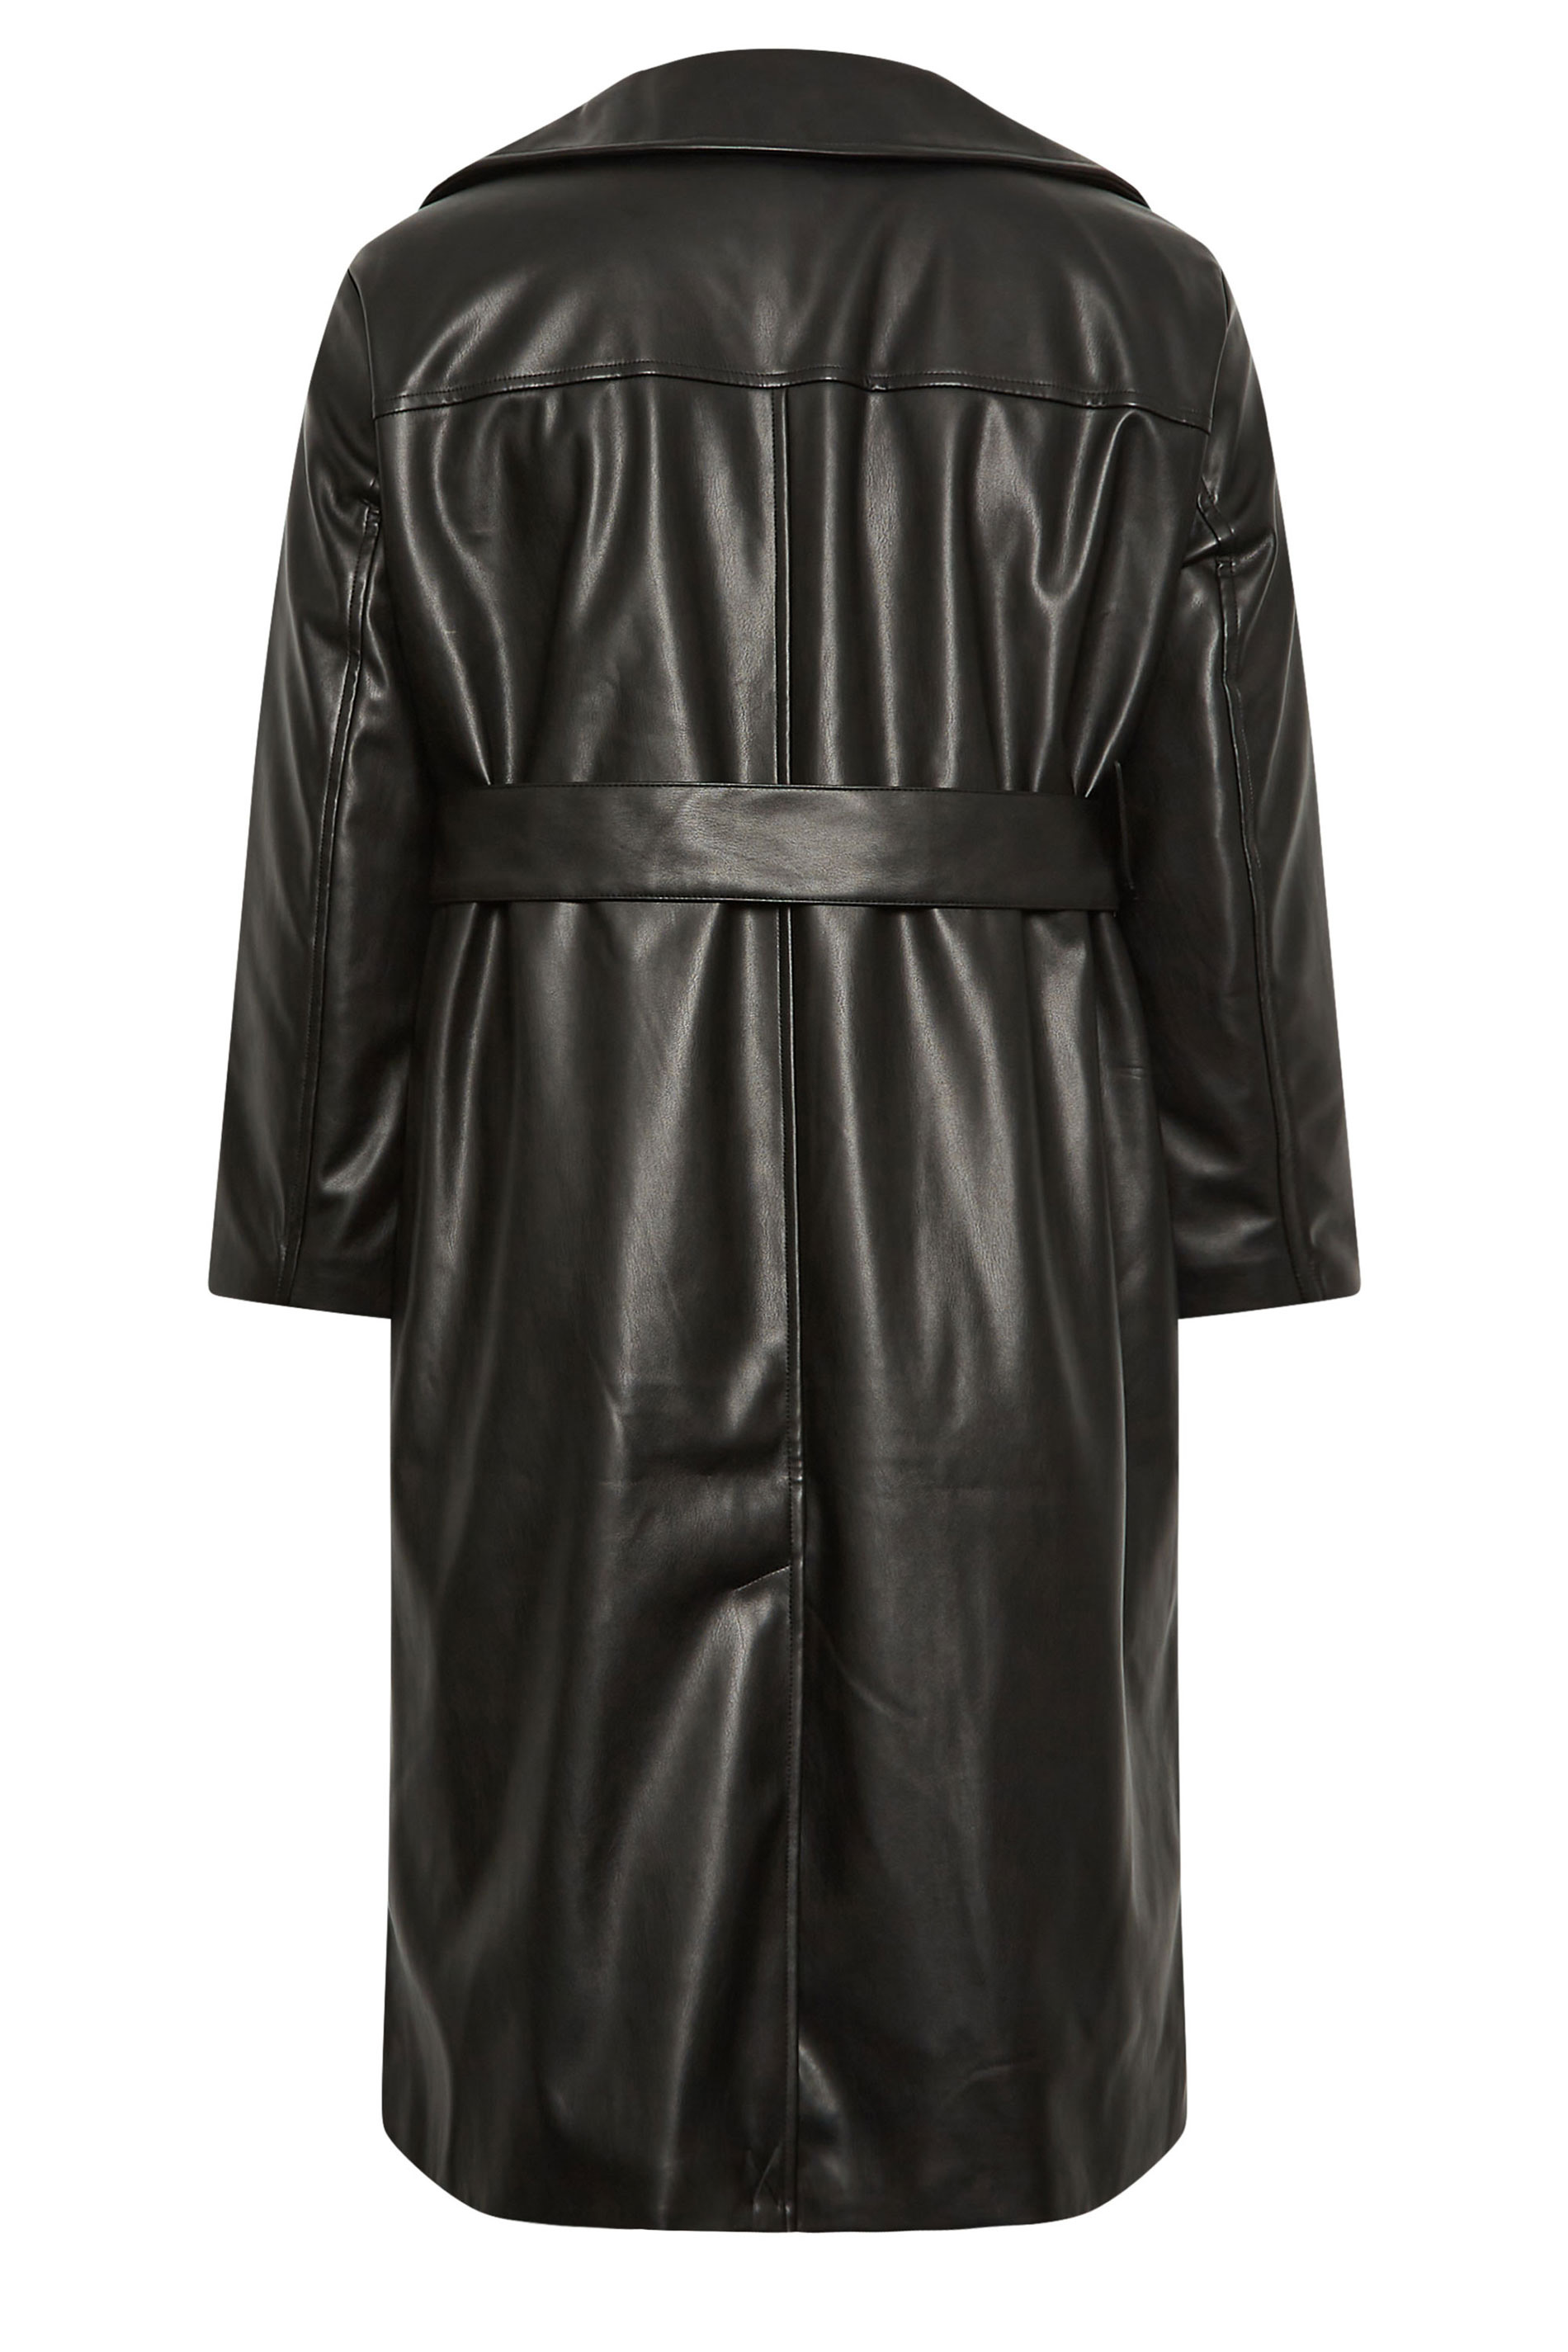 YOURS Plus Size Black Faux Leather Trench Coat | Yours Clothing